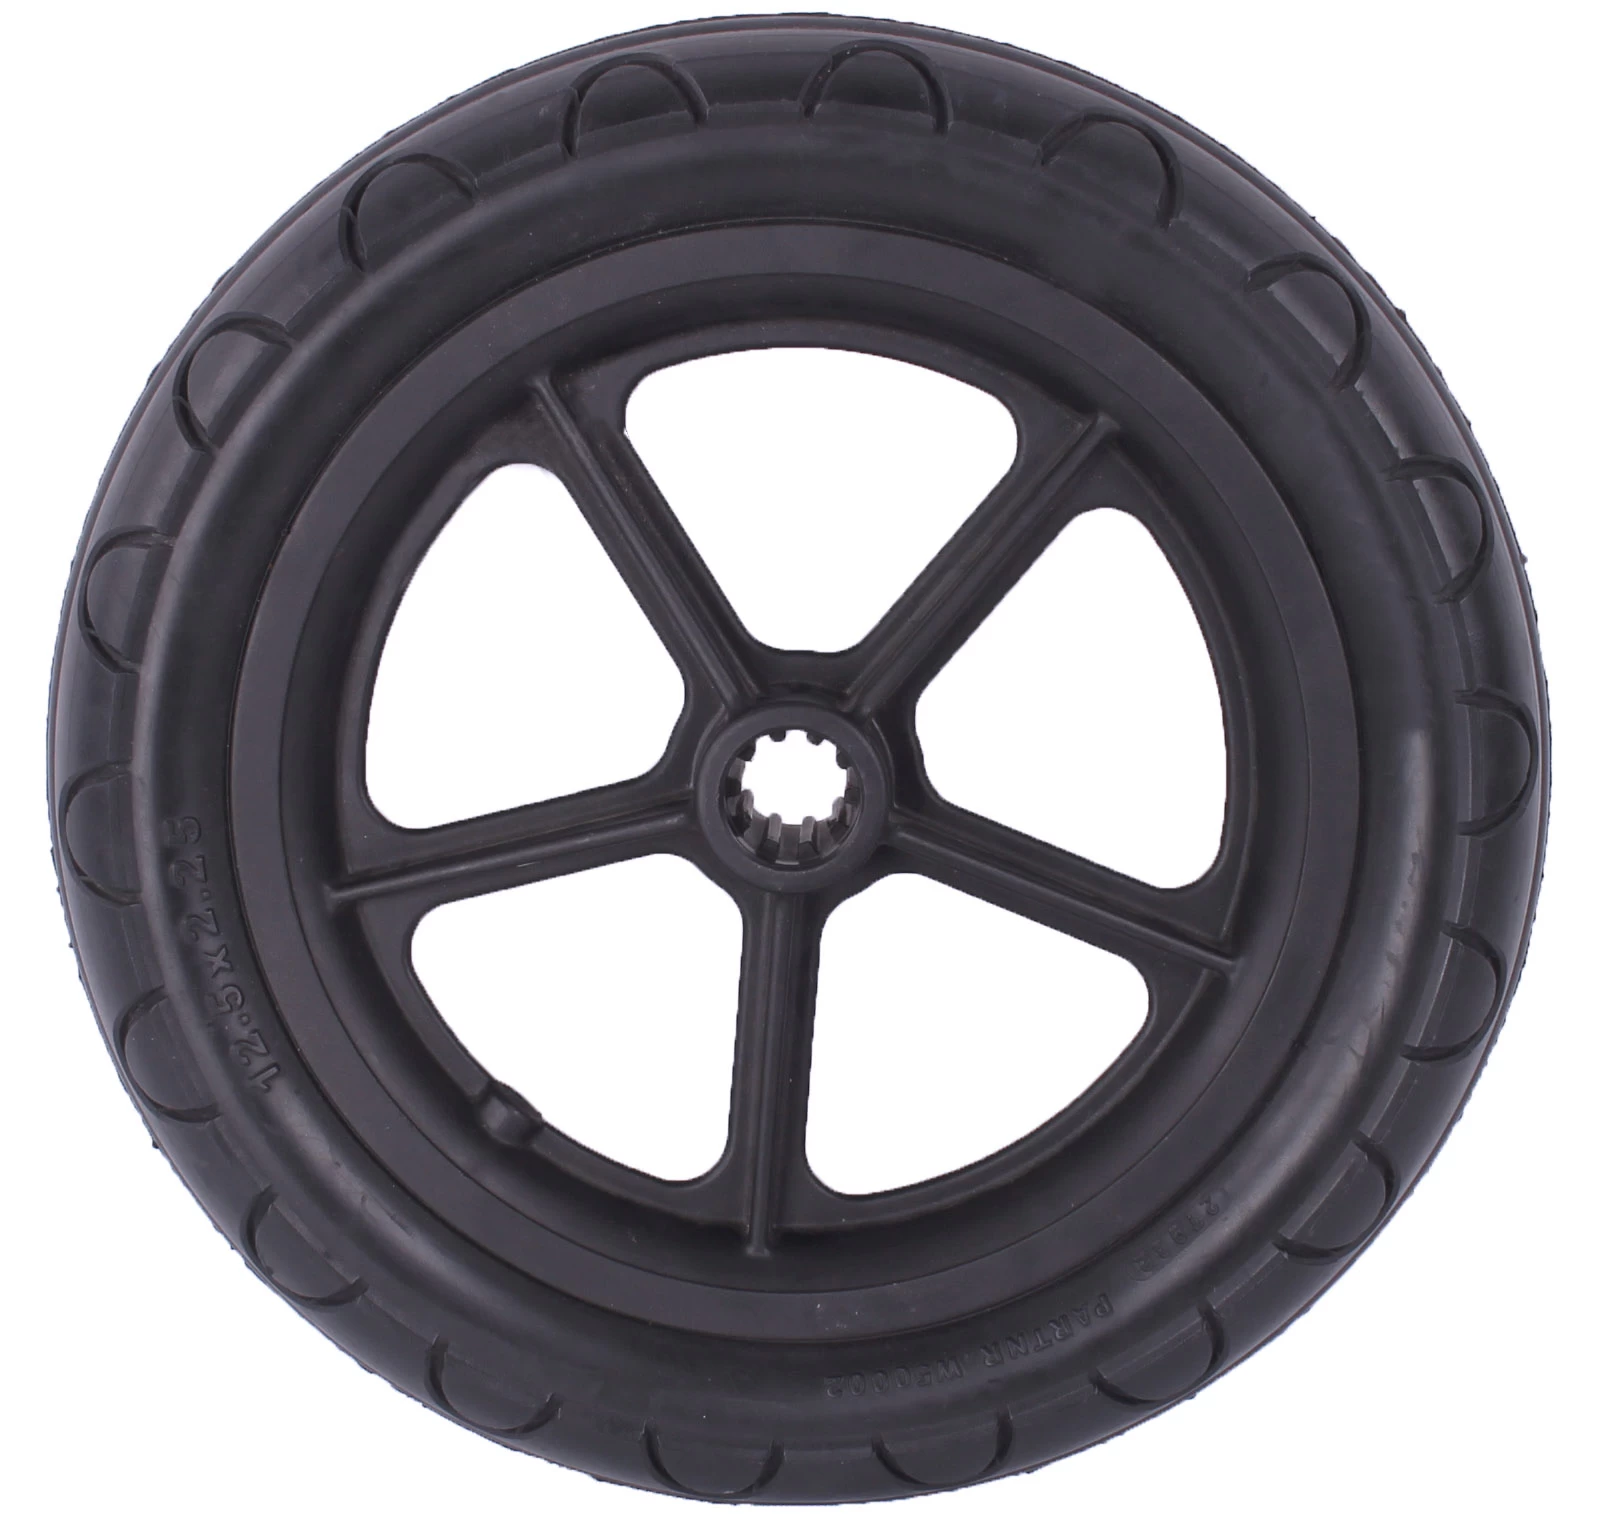 China Polyurethane Elastomer Products Suppliers, China Suppliers wholesale OEM Rohs approved pu airless durable tires, PU tires  China Manufacturers